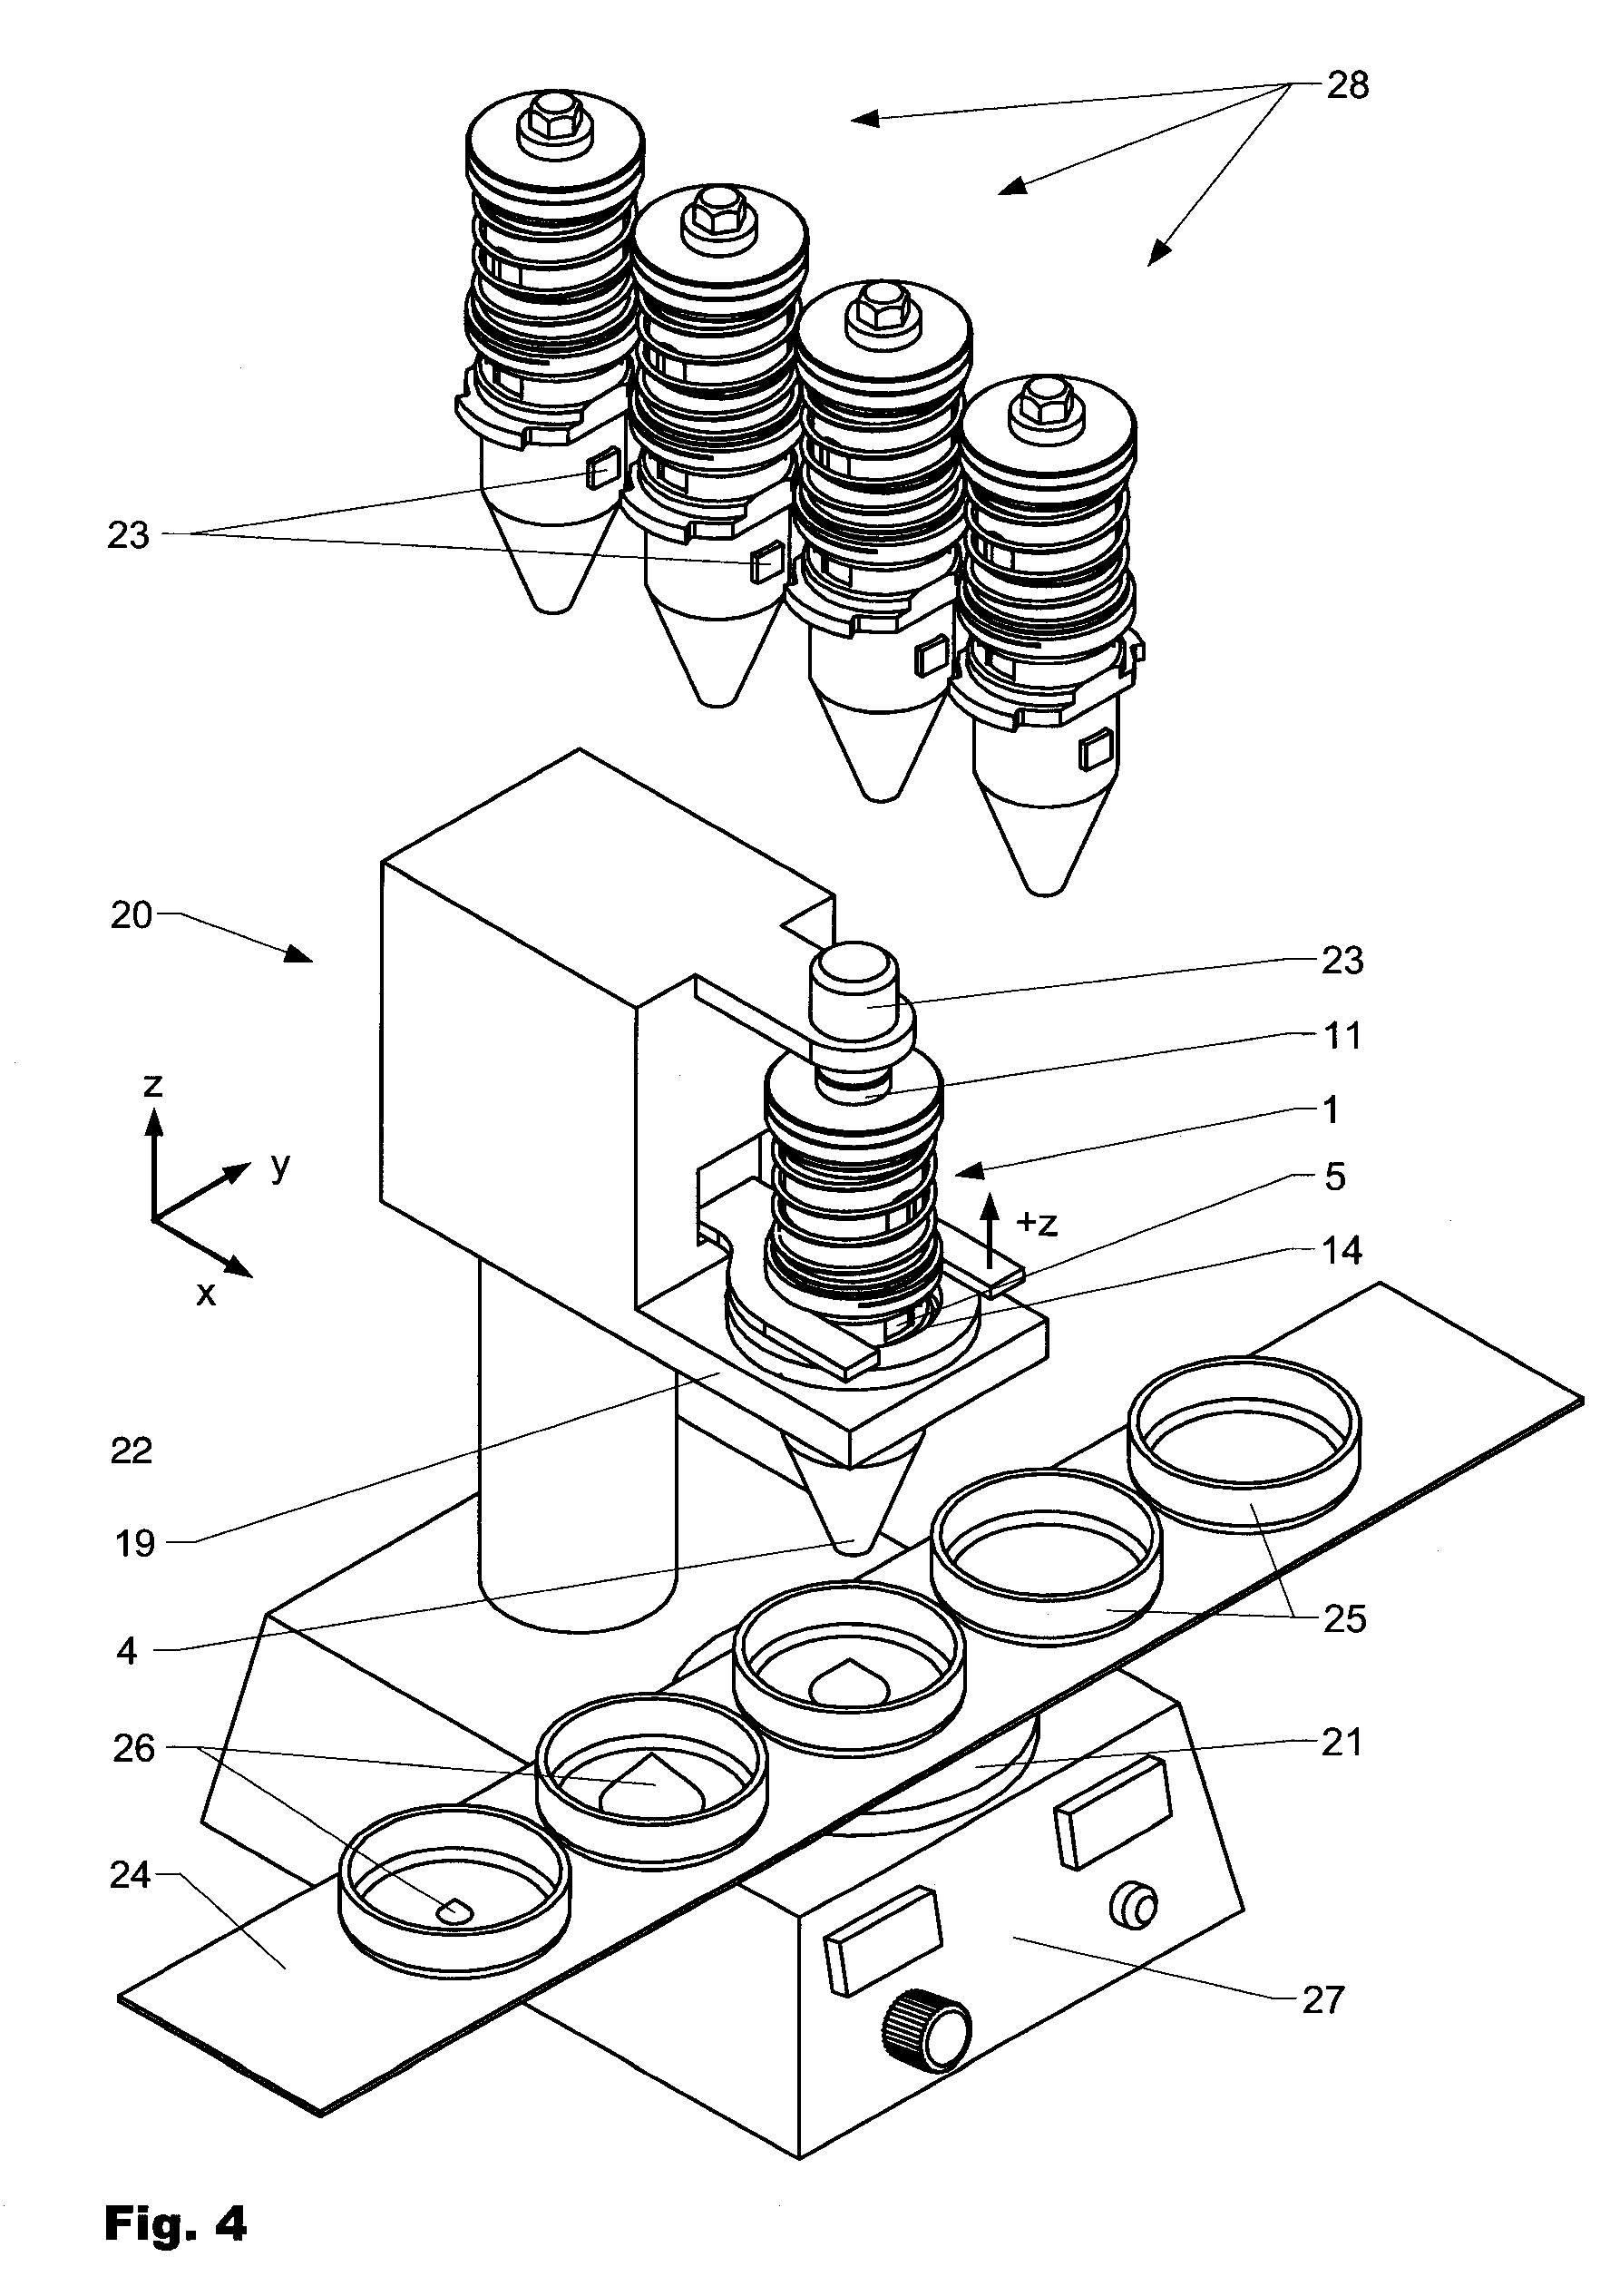 Apparatus And Method For Storing And Dispensing Material, Especially In Micro Quantities And In Combination With Limited Starting Amounts